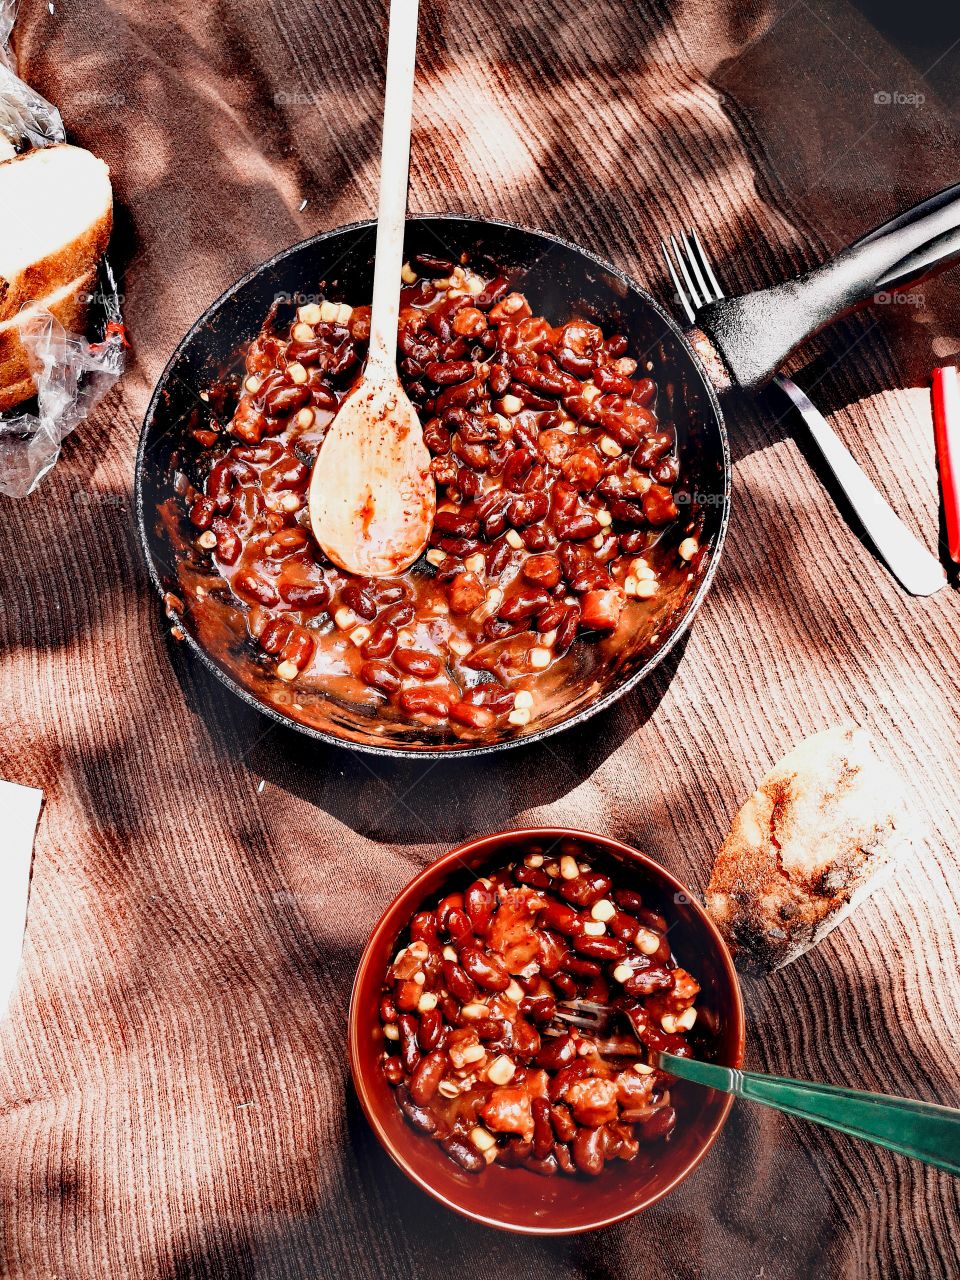 Simple food on fire at picnic, beans with hot sauce